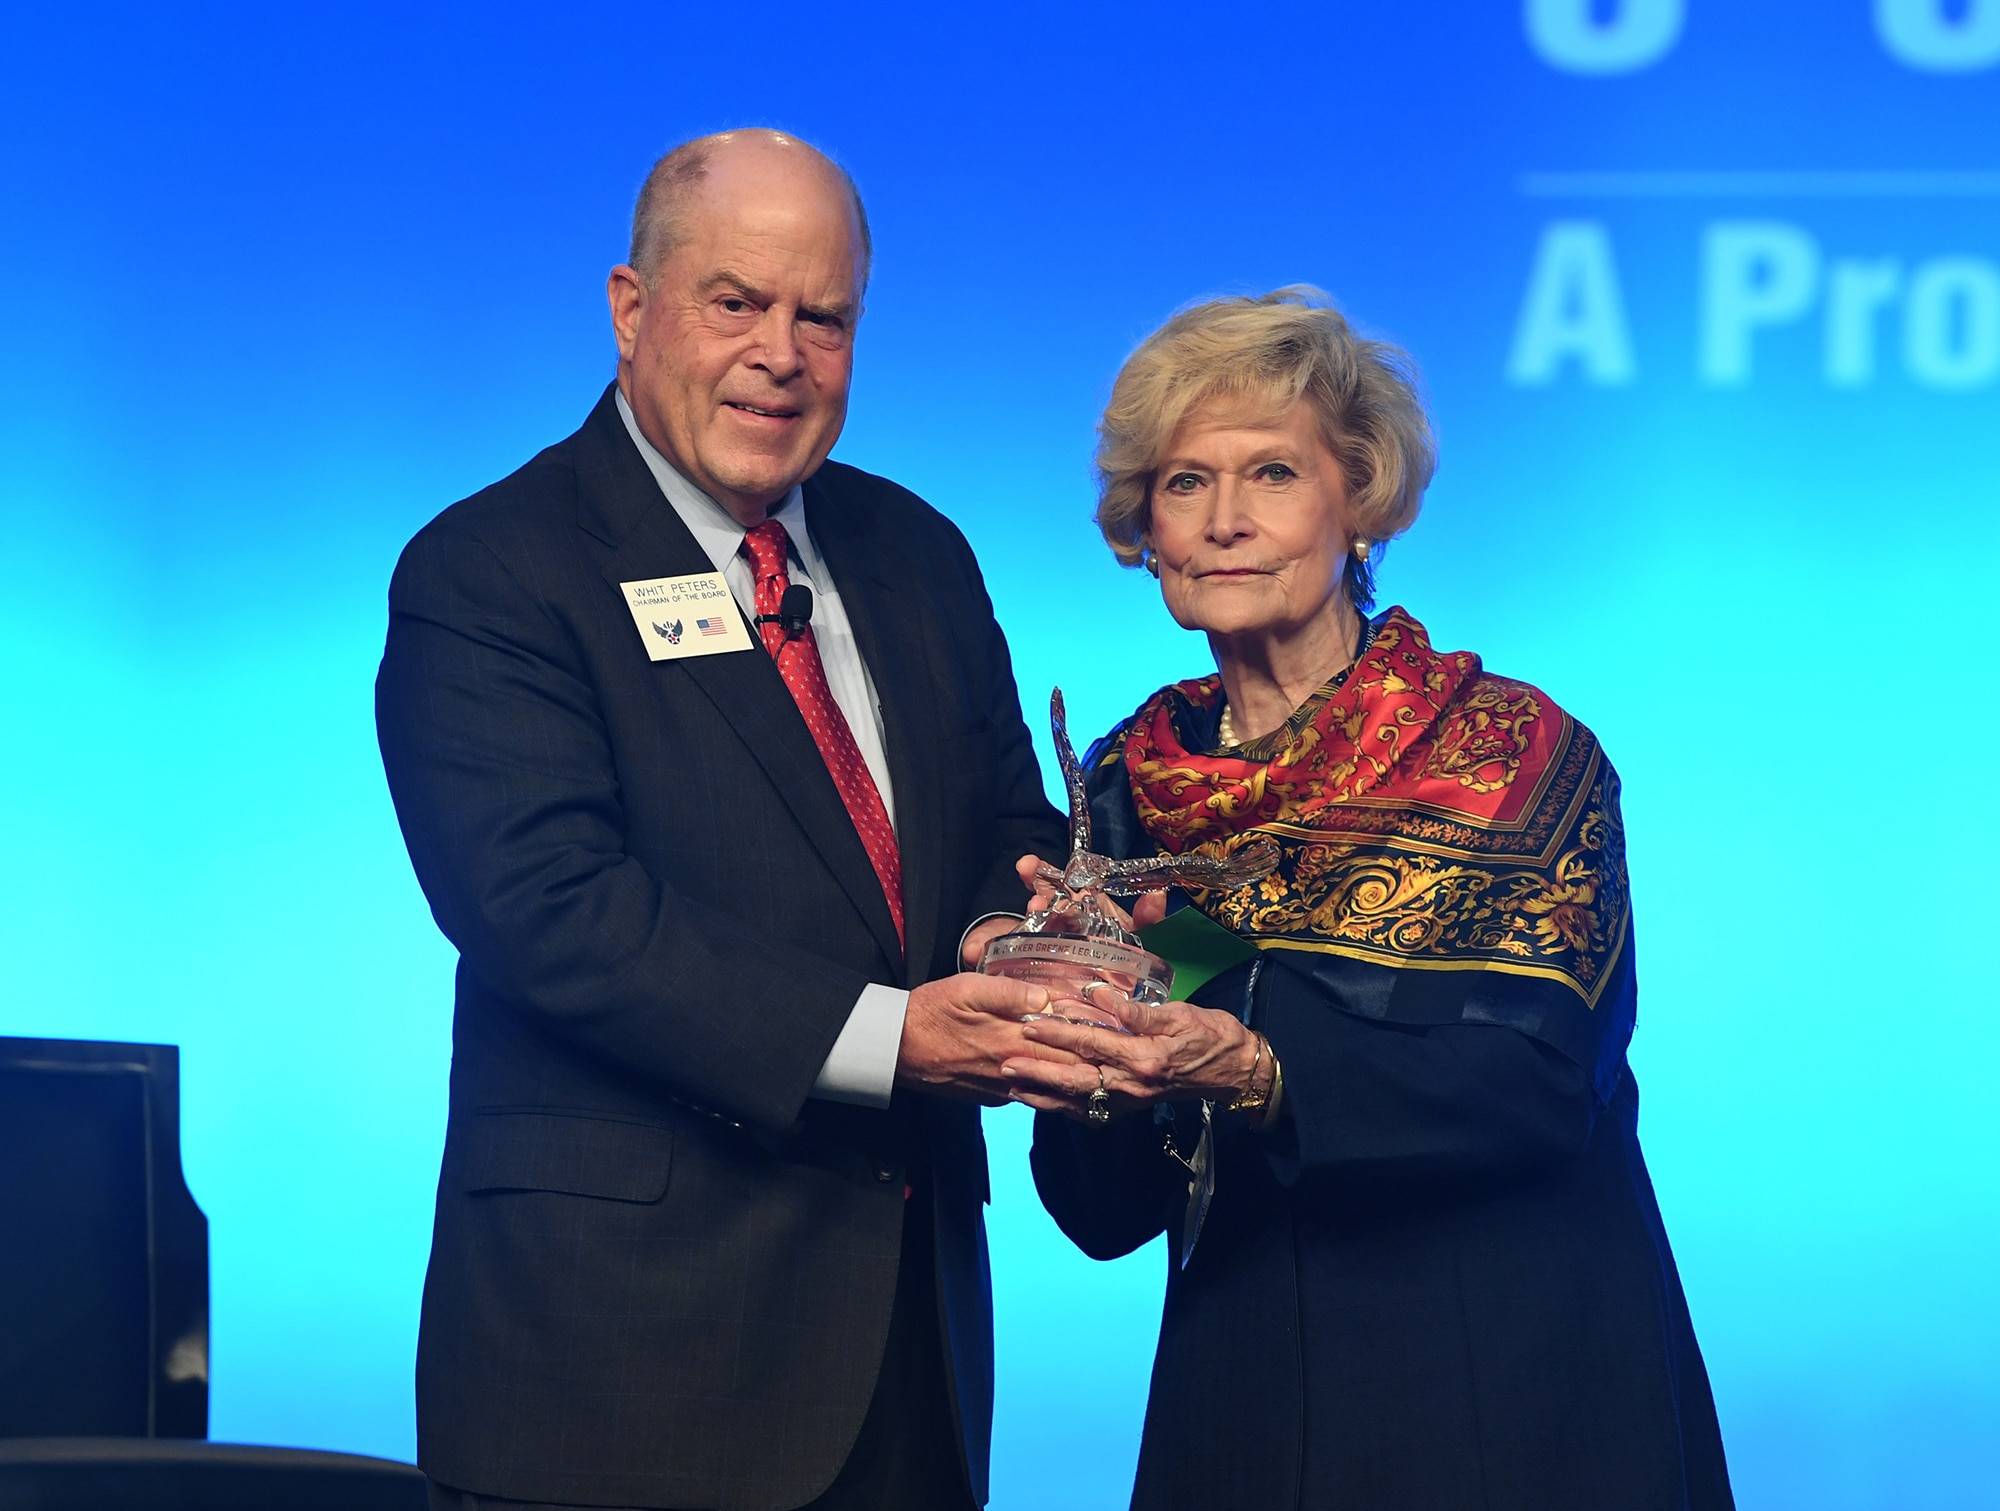 Dr. Lucy Greene receives the W. Parker Greene Legacy Award from Whit Peters, Chairman of the Air Force Association Board, during the Air Force Association Air, Space and Cyber Conference in National Harbor, Md. For more than 40 years, Dr. Greene and her late husband W. Parker Greene have been staunch advocates for Airmen and the mission at Moody Air Force Base. (U.S. Air Force photo by Andy Morataya)